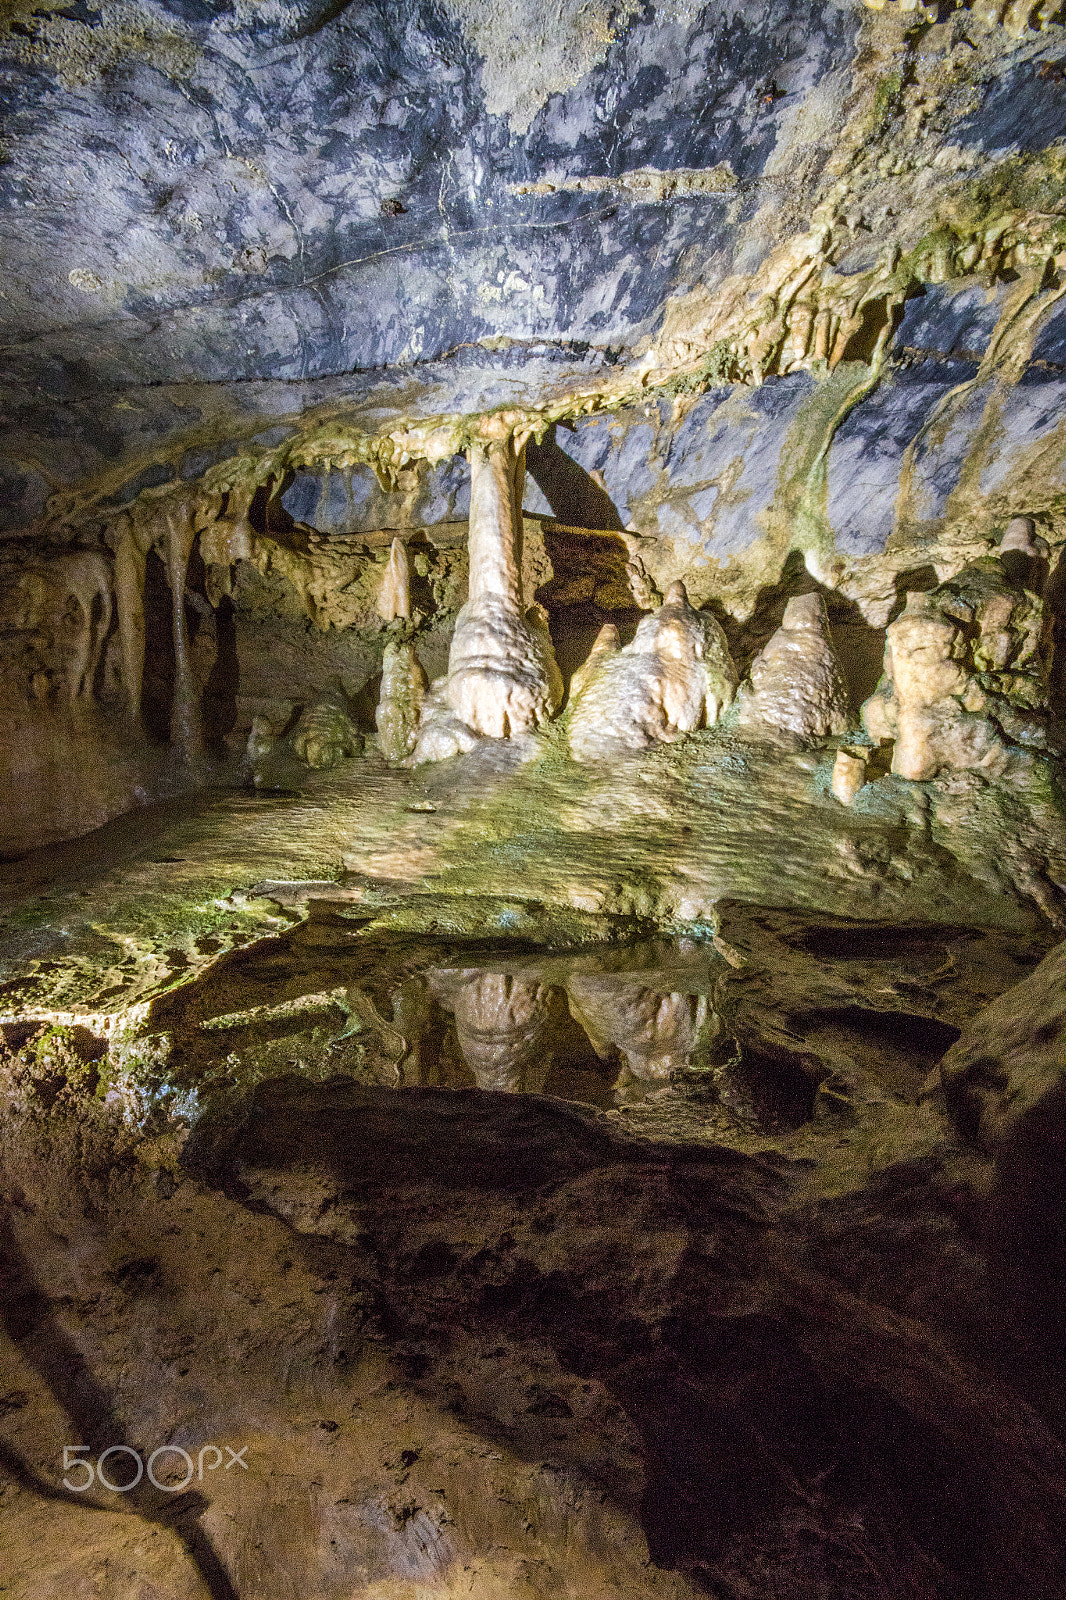 Pentax K-S2 sample photo. Impression from the stalactite cave no. 4 - the landscape photography